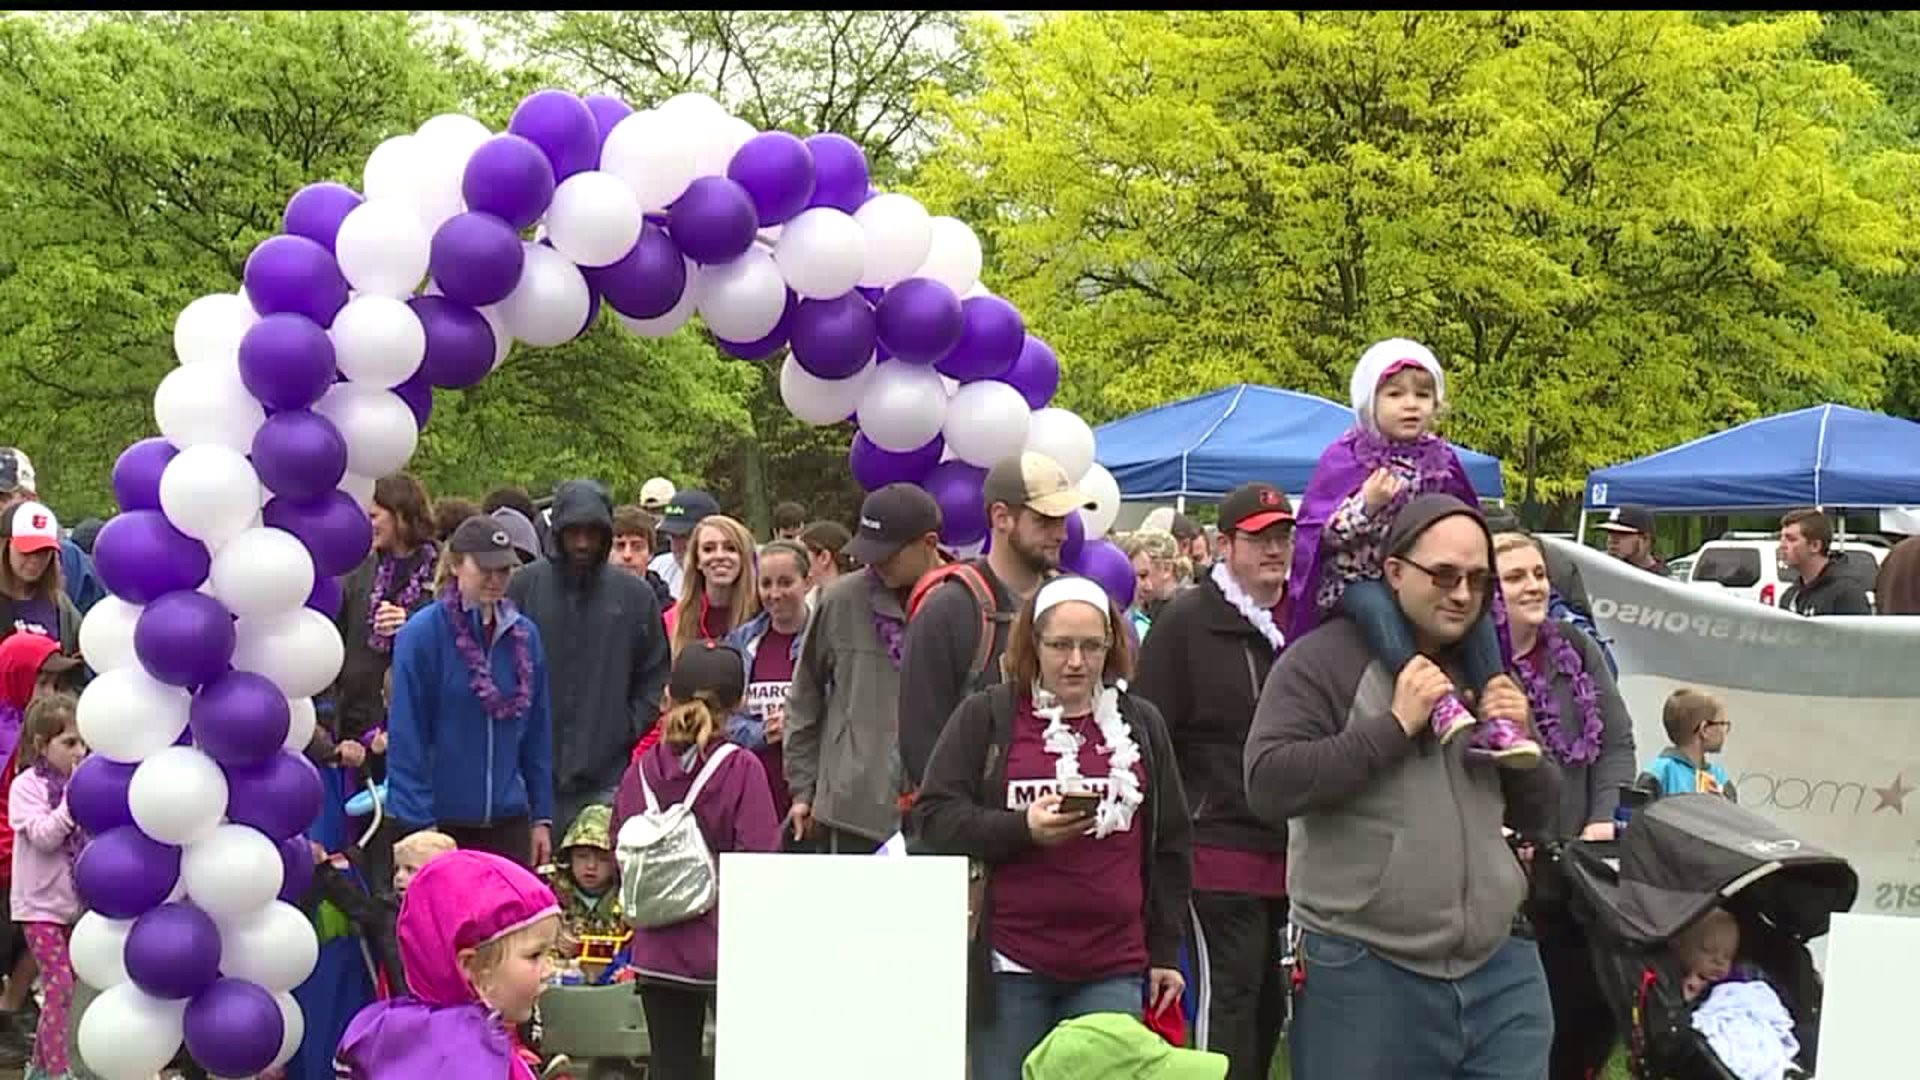 March for Babies held at John C Rudy park